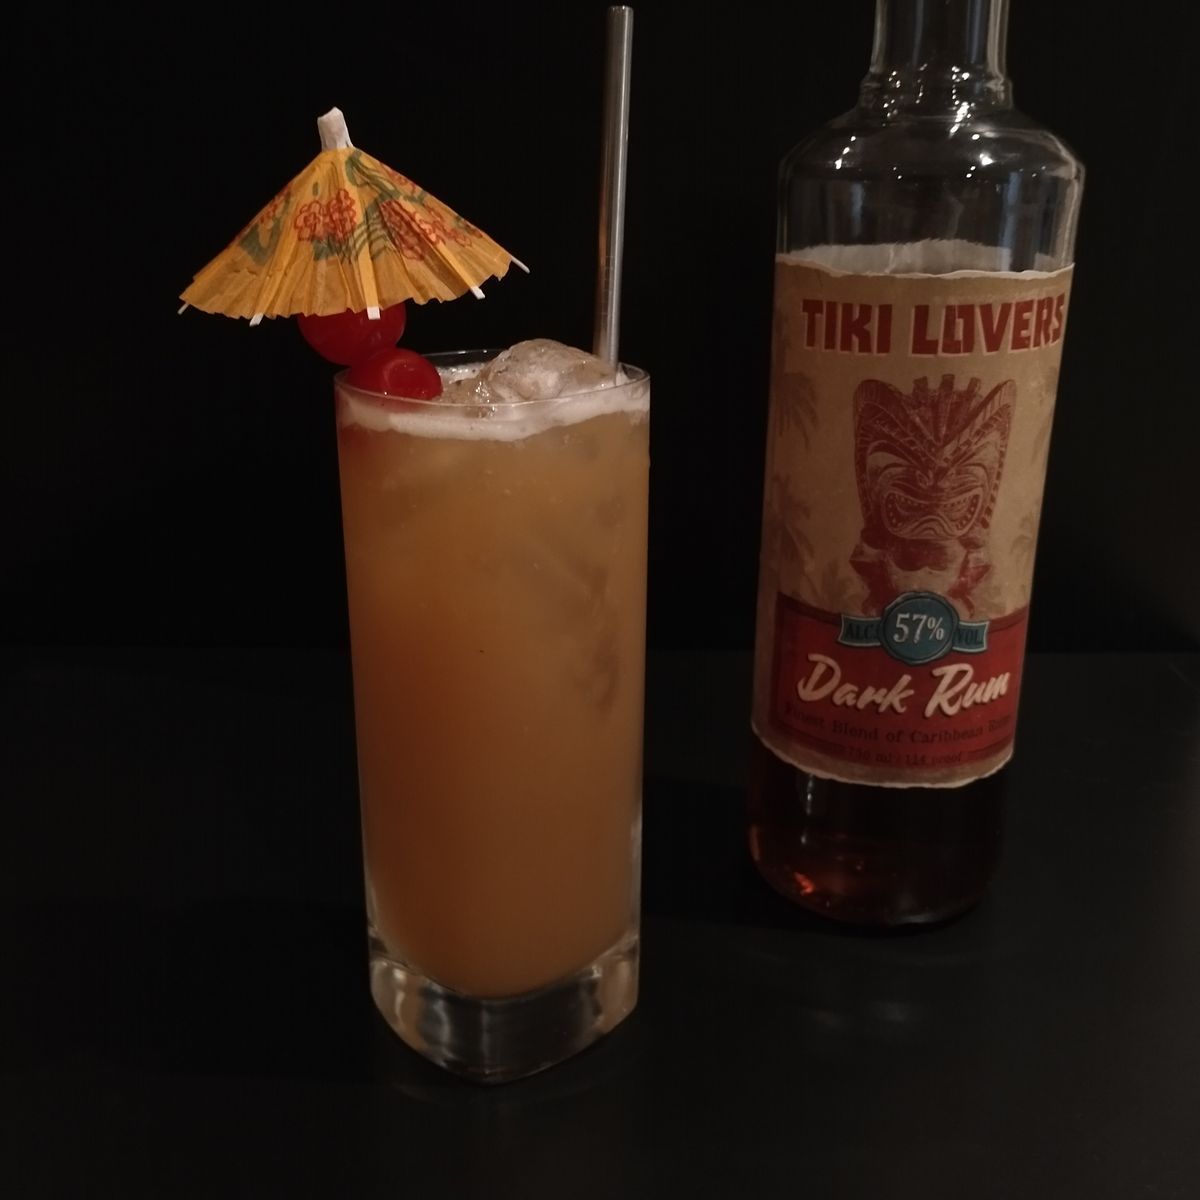 I'm excited for this first drink made with the dark rum from Tiki Lovers. This cocktail was inspired by a friend who said it's a common order at the bar where she works. Thanks, Ash.